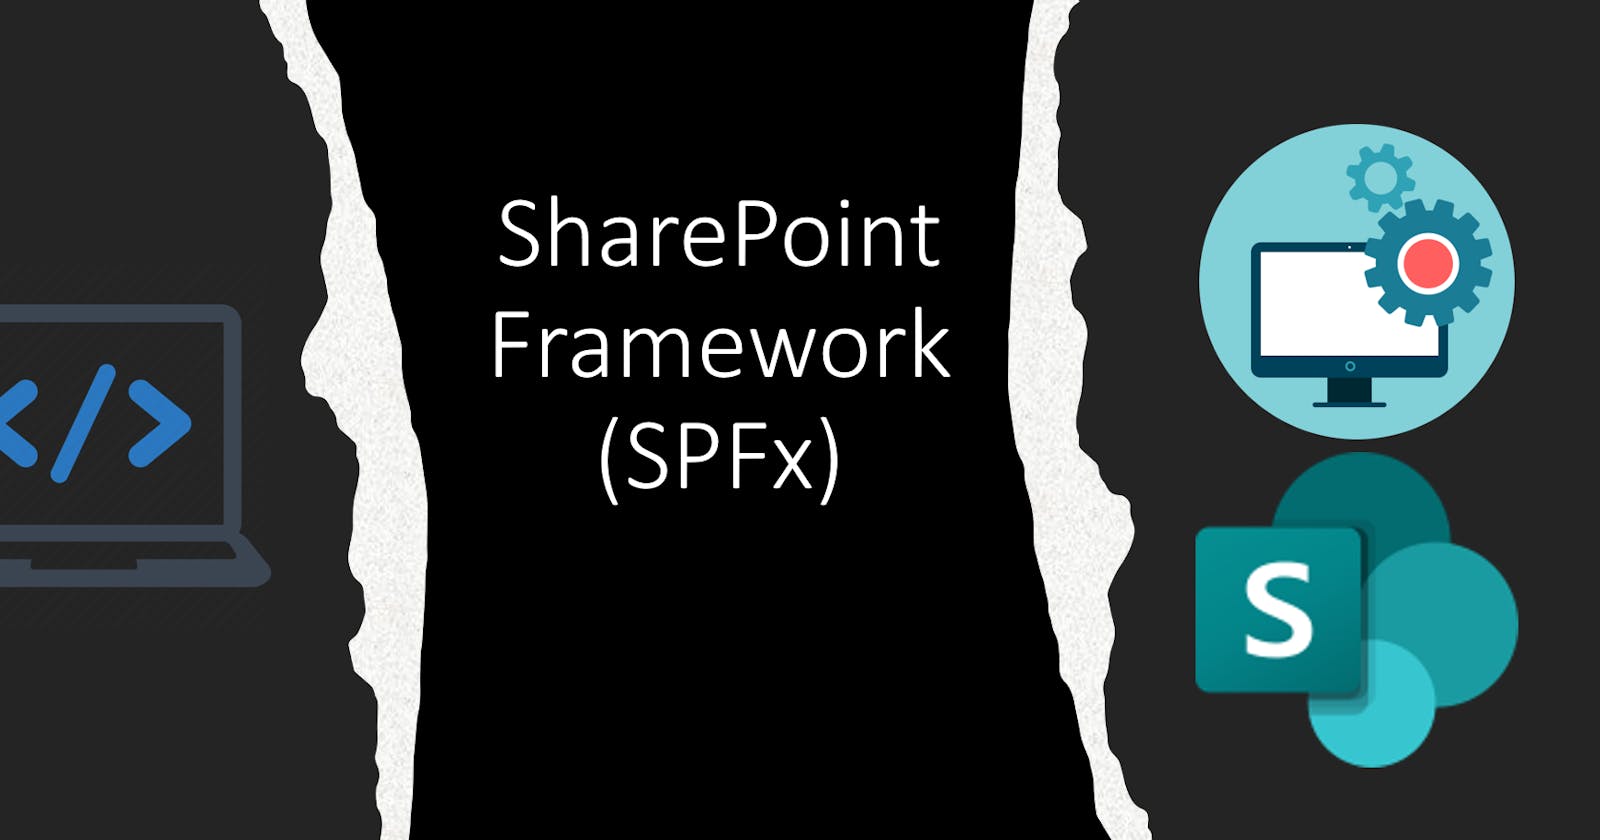 Why SharePoint Framework (SPFx) is recommended for SharePoint Development